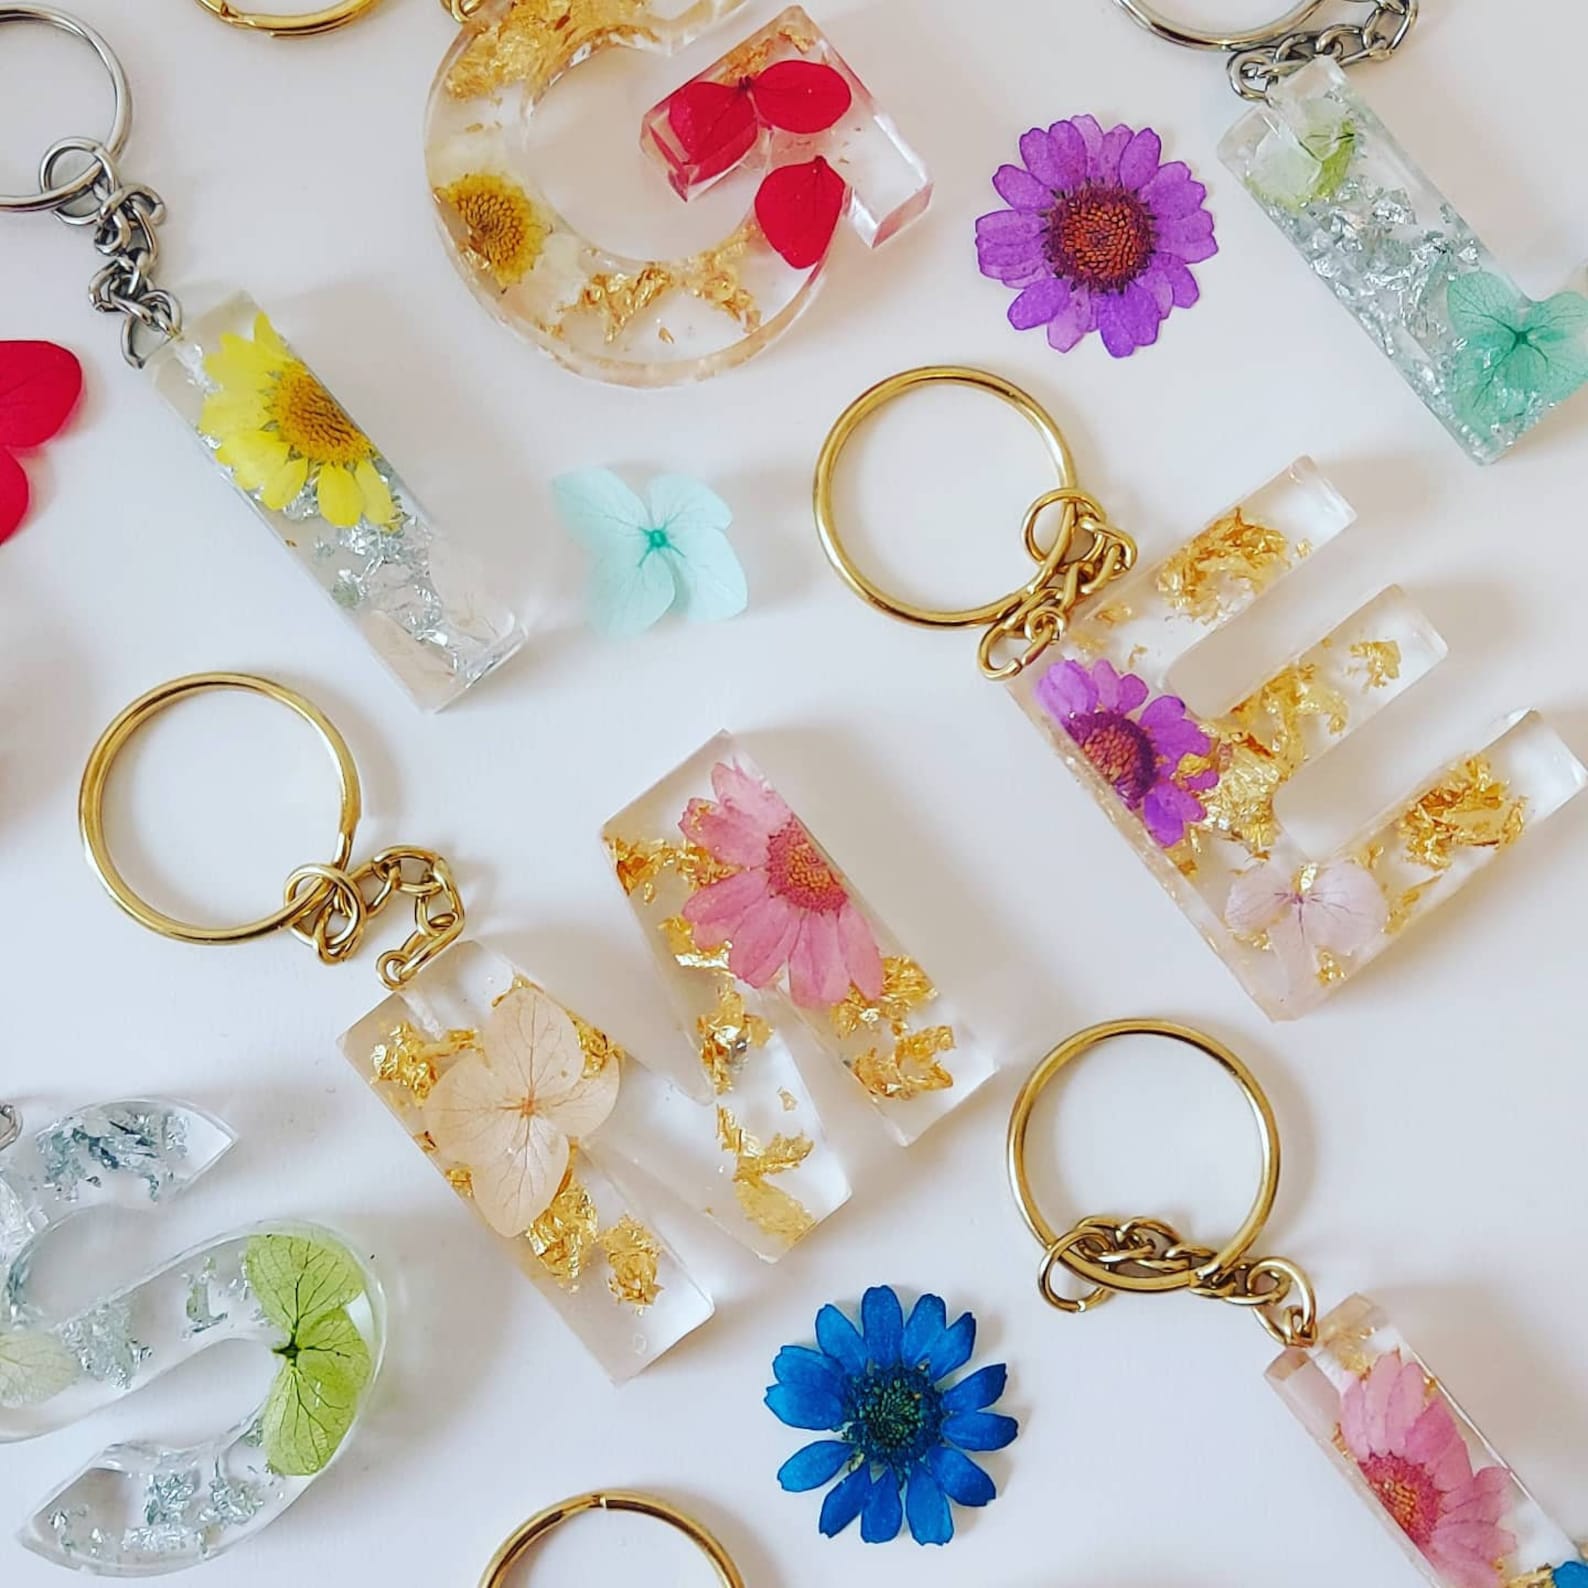 Crystal transparent resin, actual pressed flowers, and metallic leaf are used to make these handcrafted keyrings